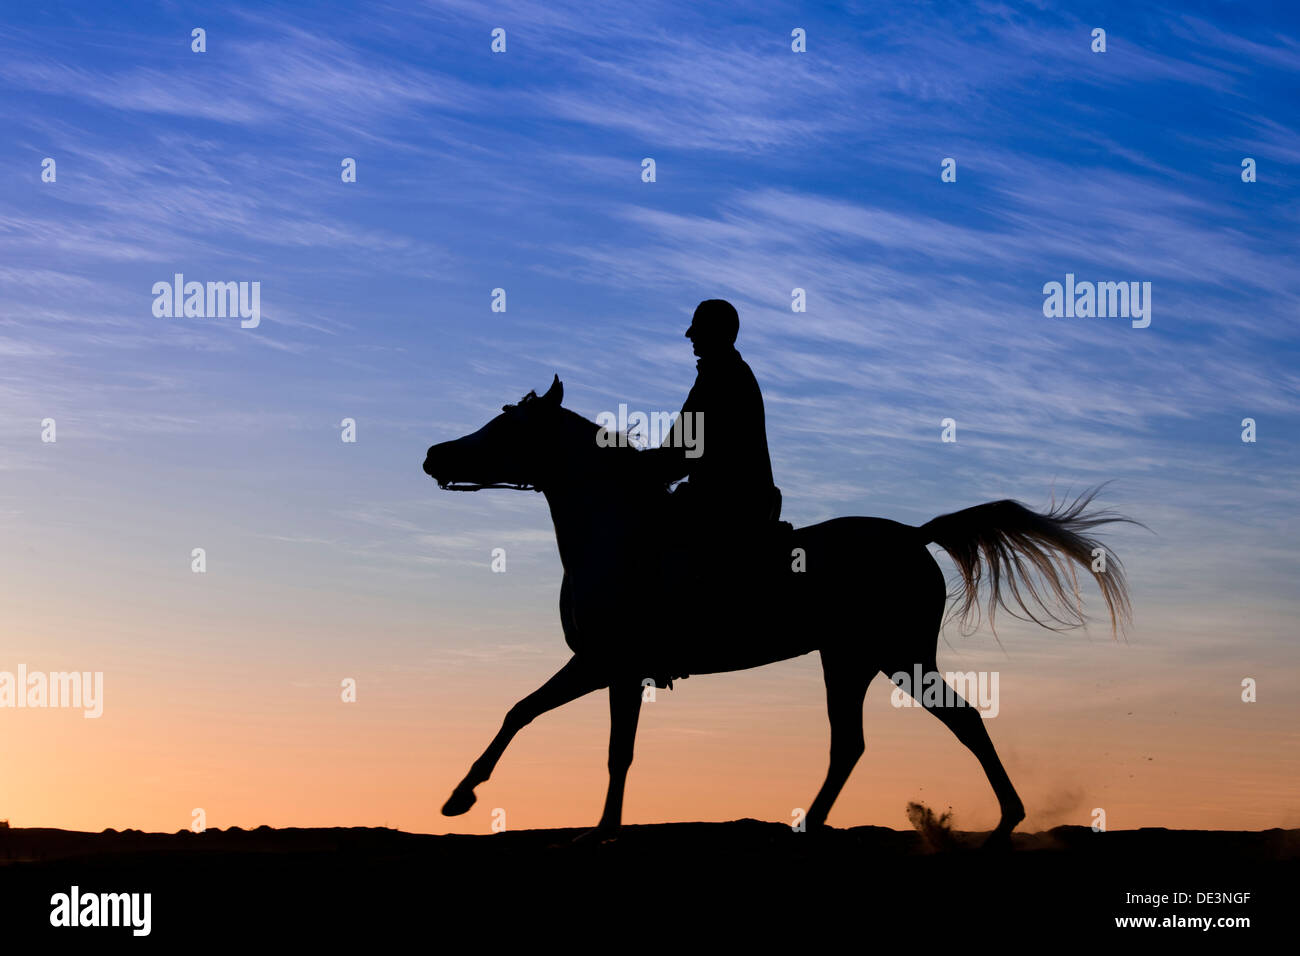 Purebred Arabian Horse Adult rider galloping desert, silhouetted against evening sky Stock Photo